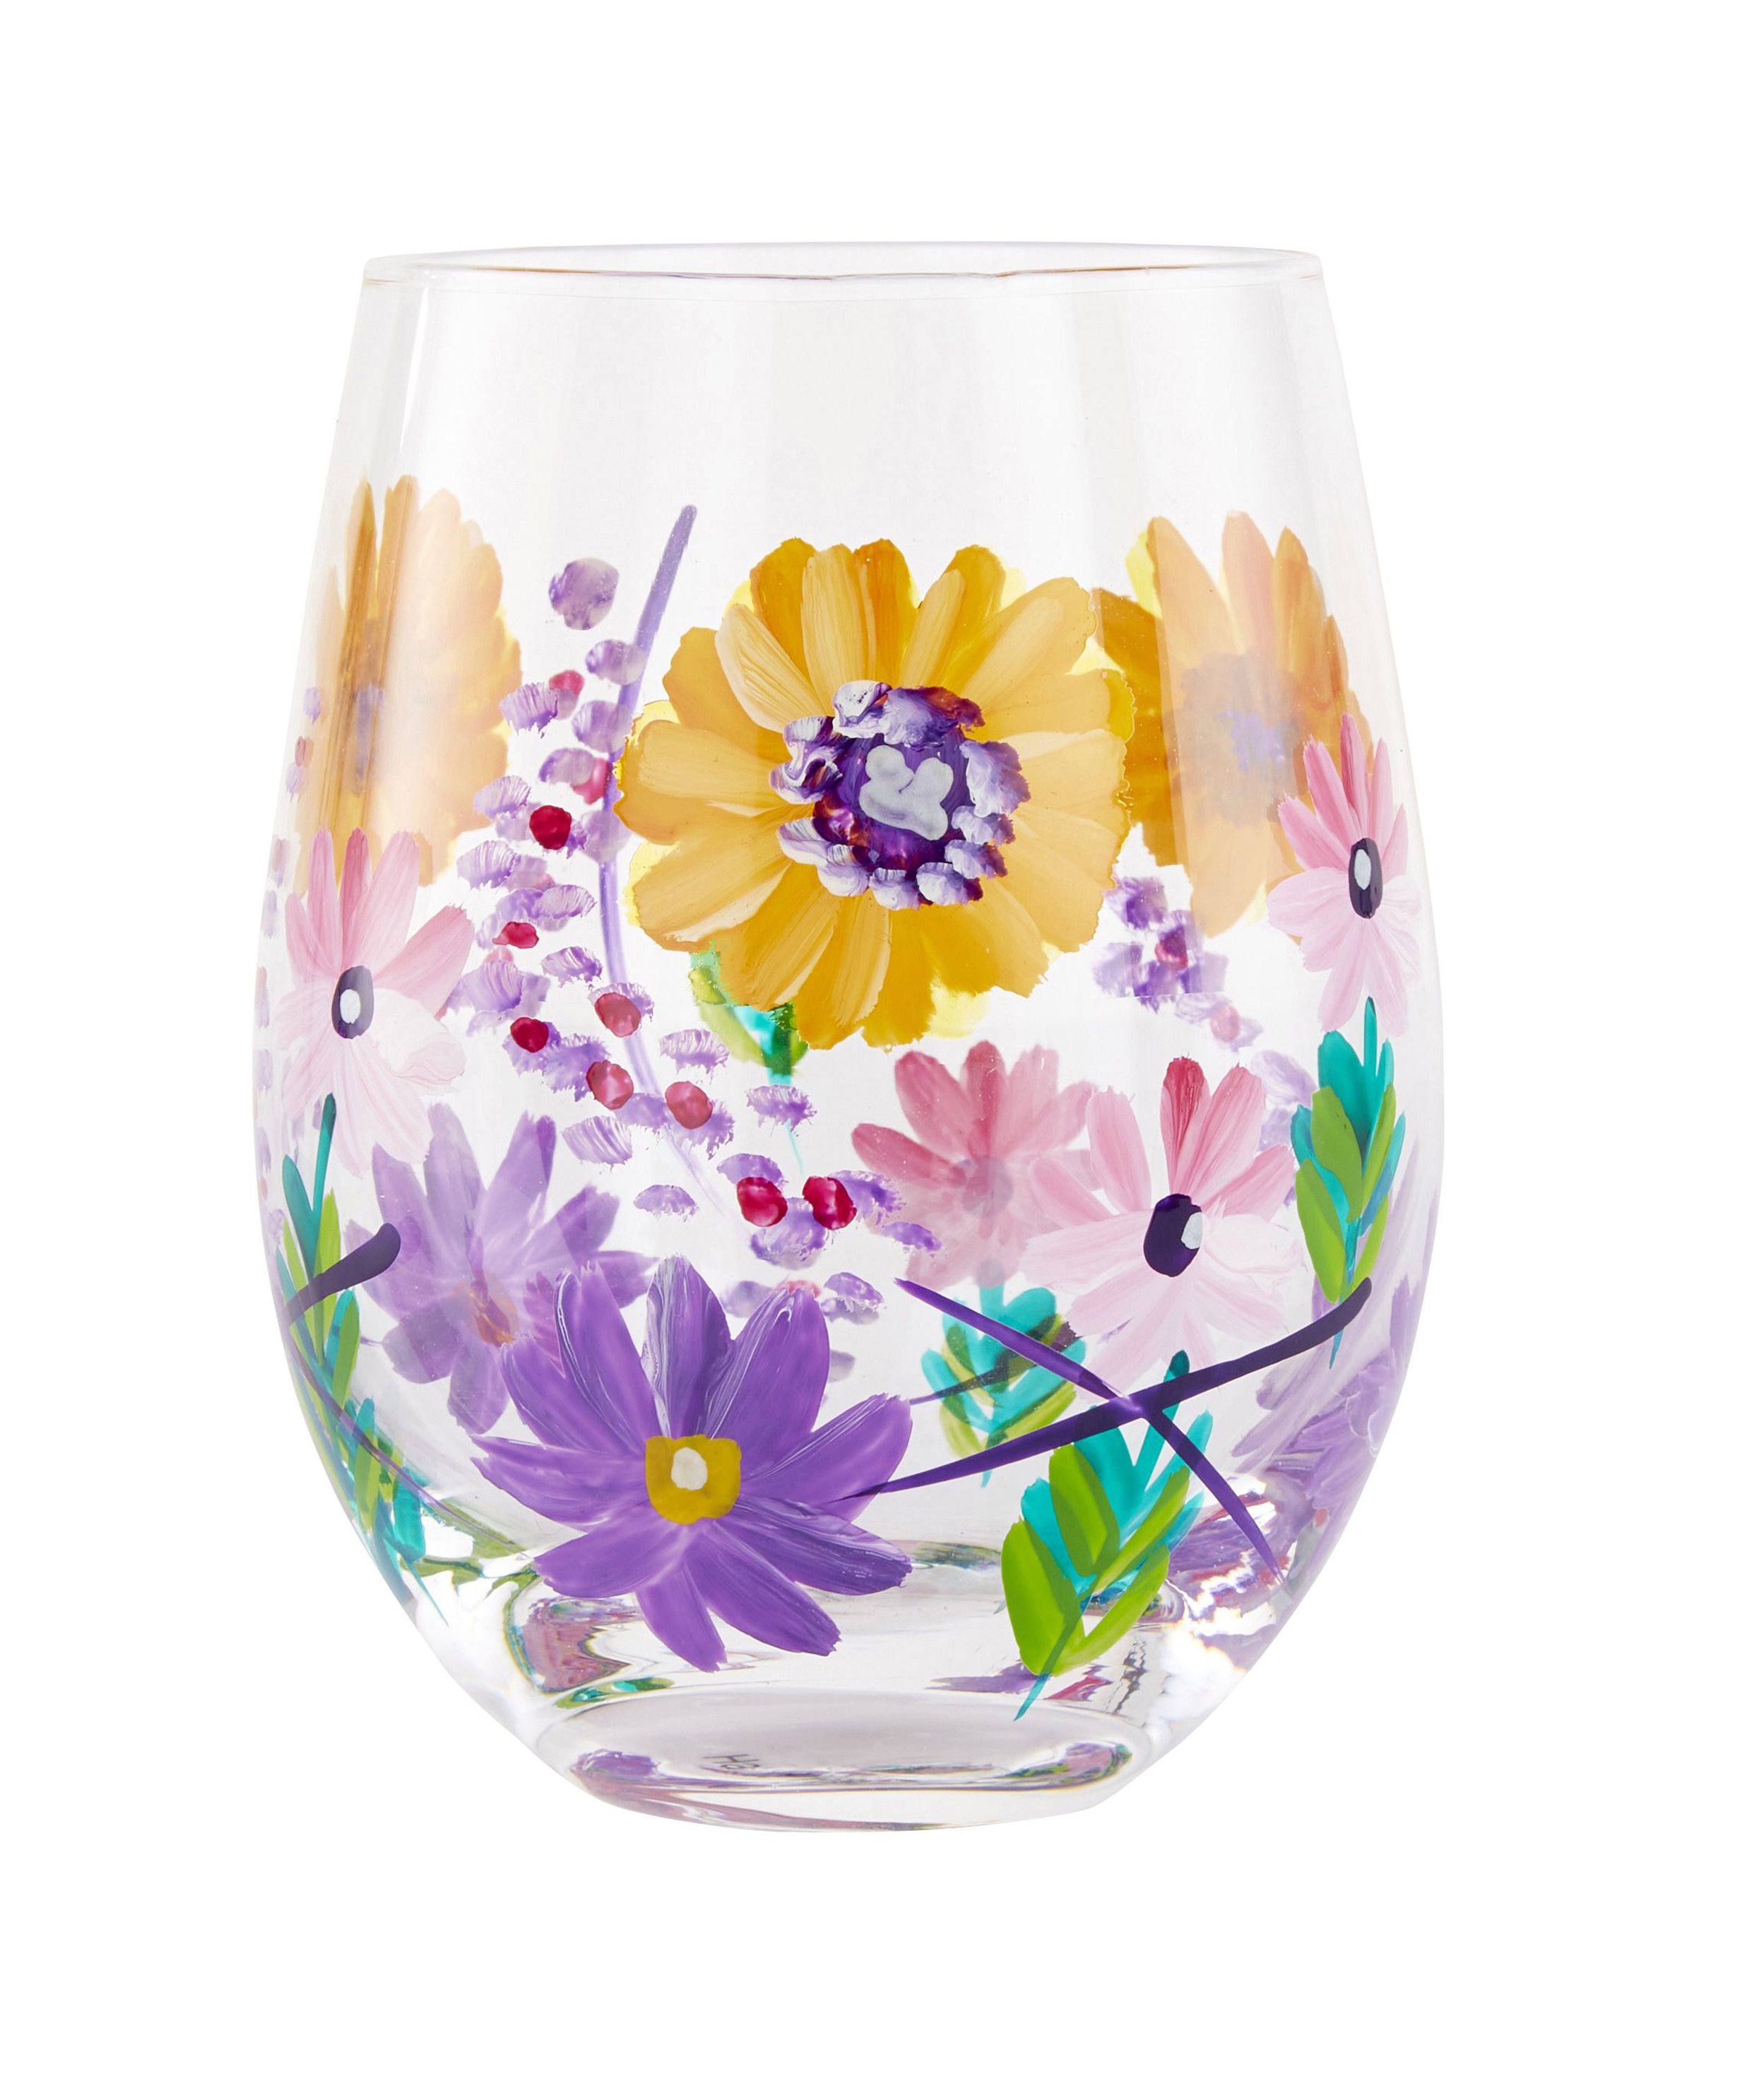 2. Fabulous Floral Hand Painted Tumbler €23.41, 